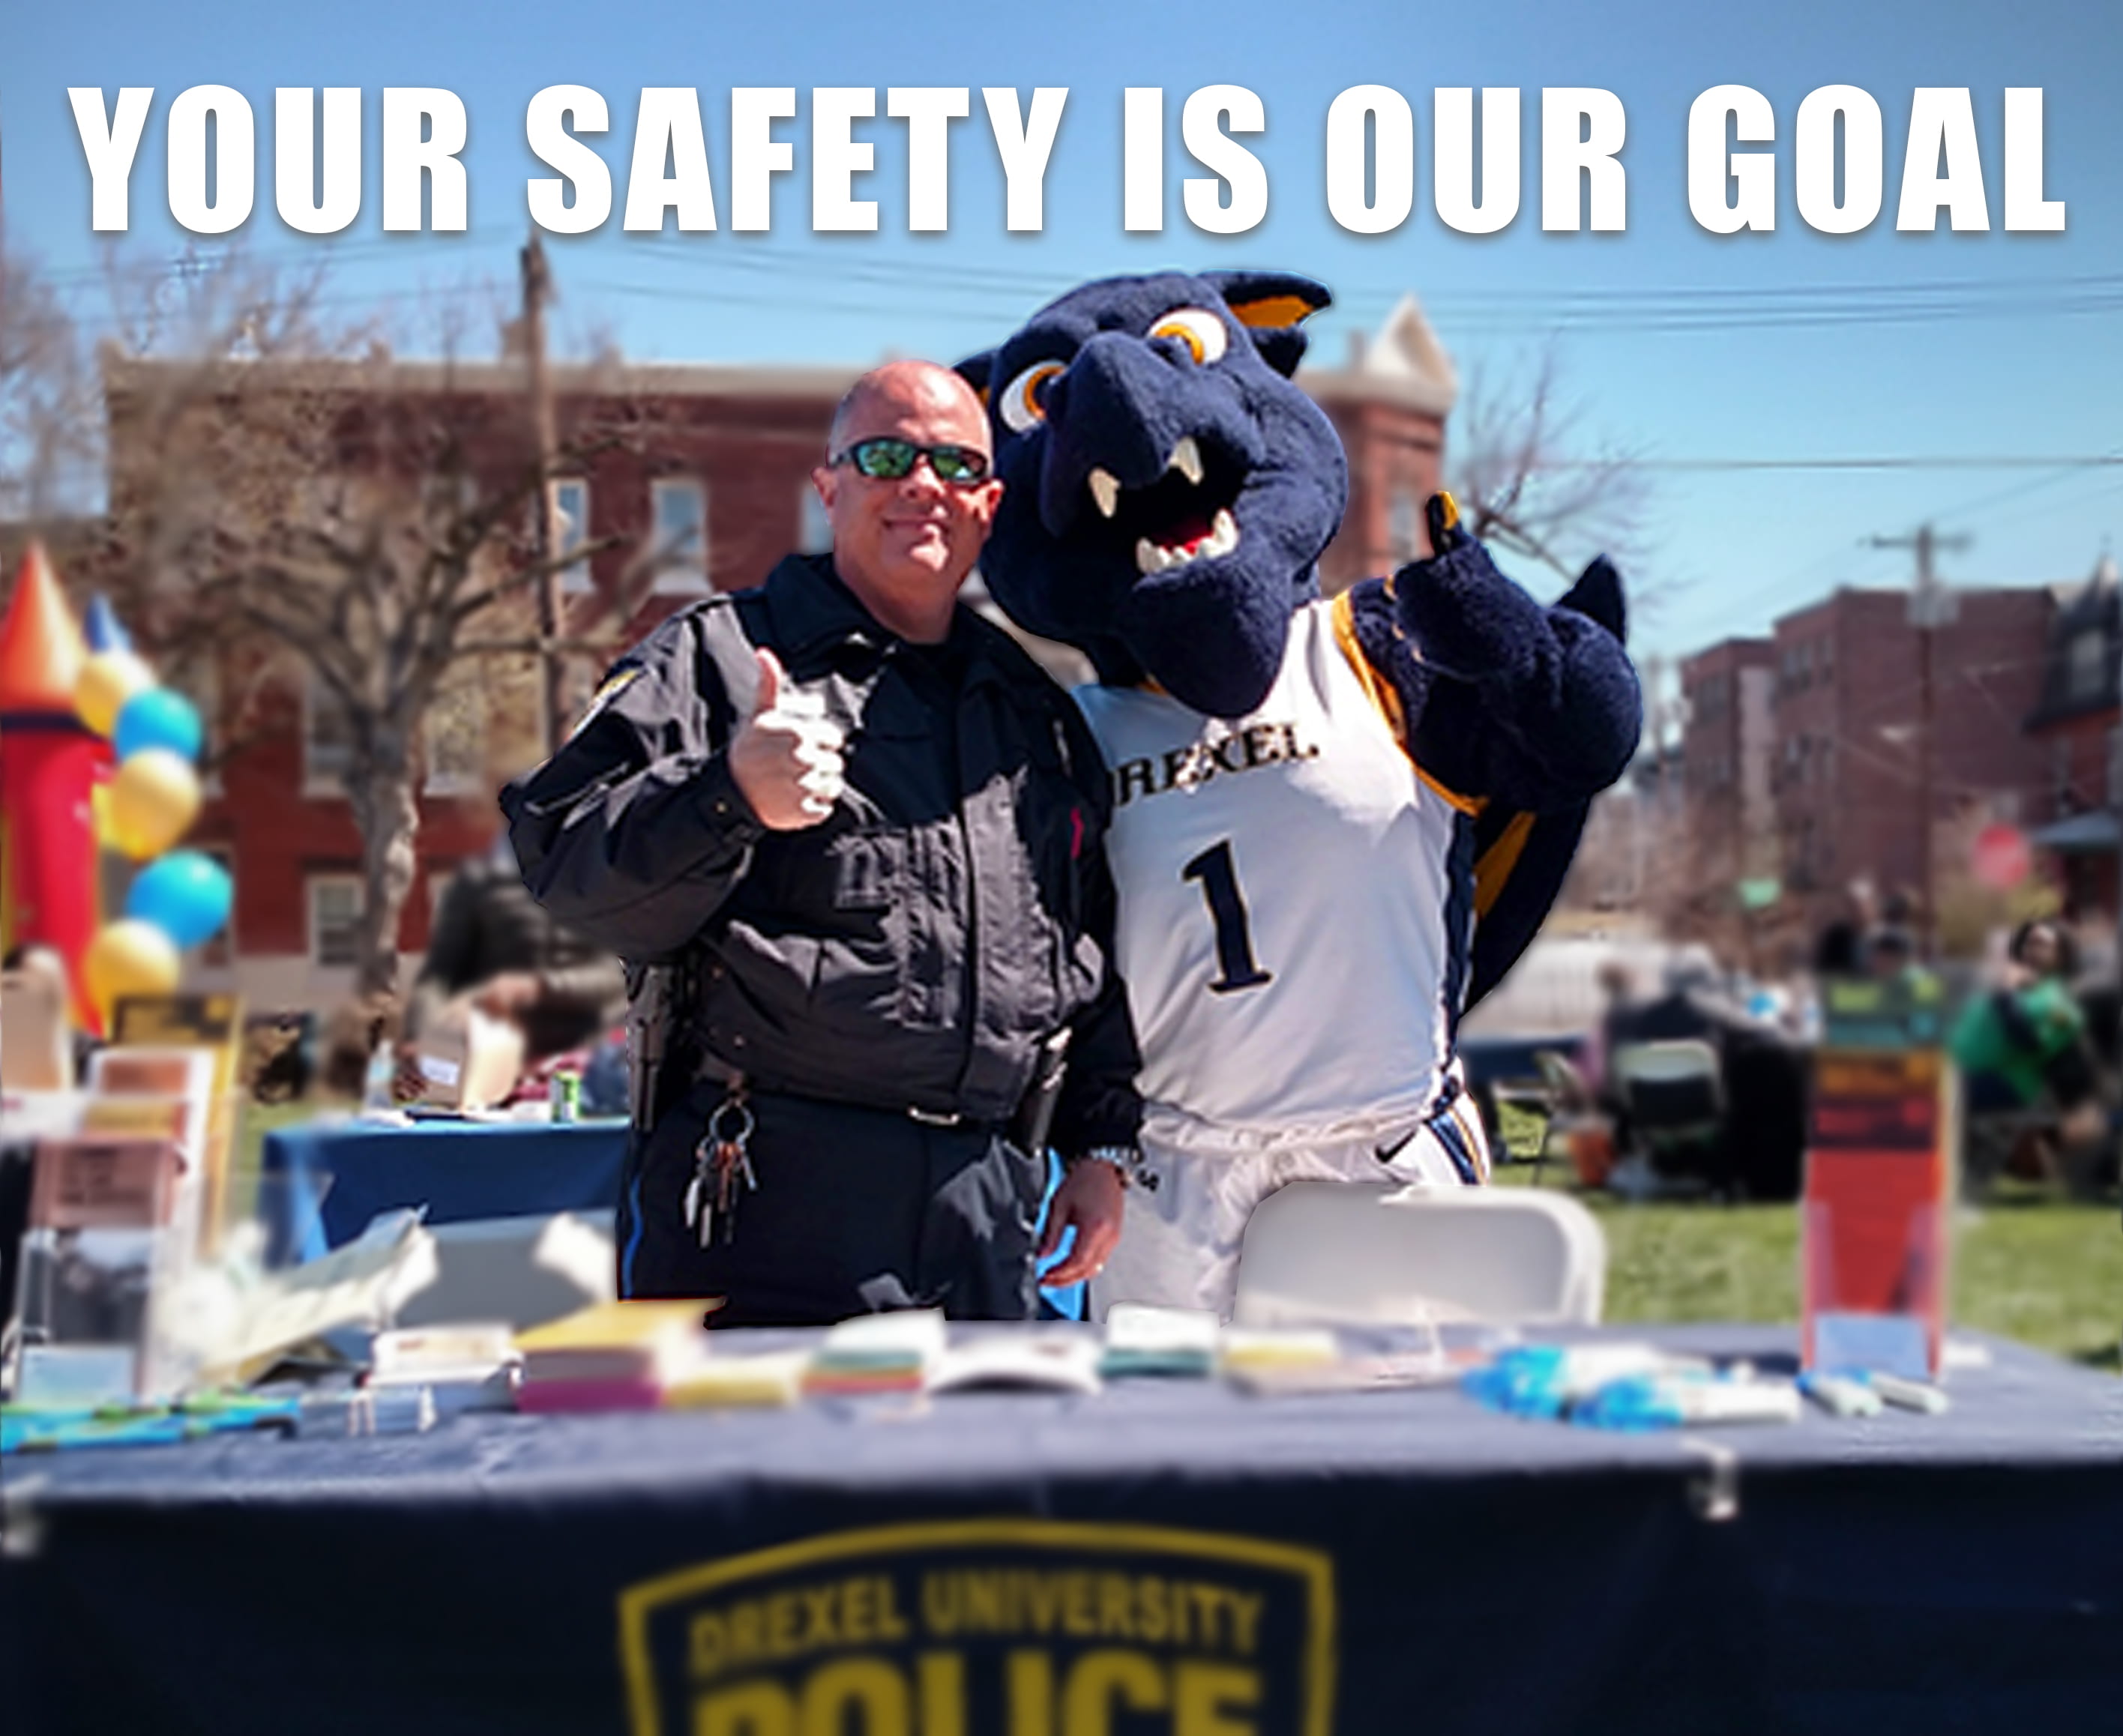 Image of an officer and Mario the Magnificent dragon posing at a table outside with the text "Your Safety is Our Goal."